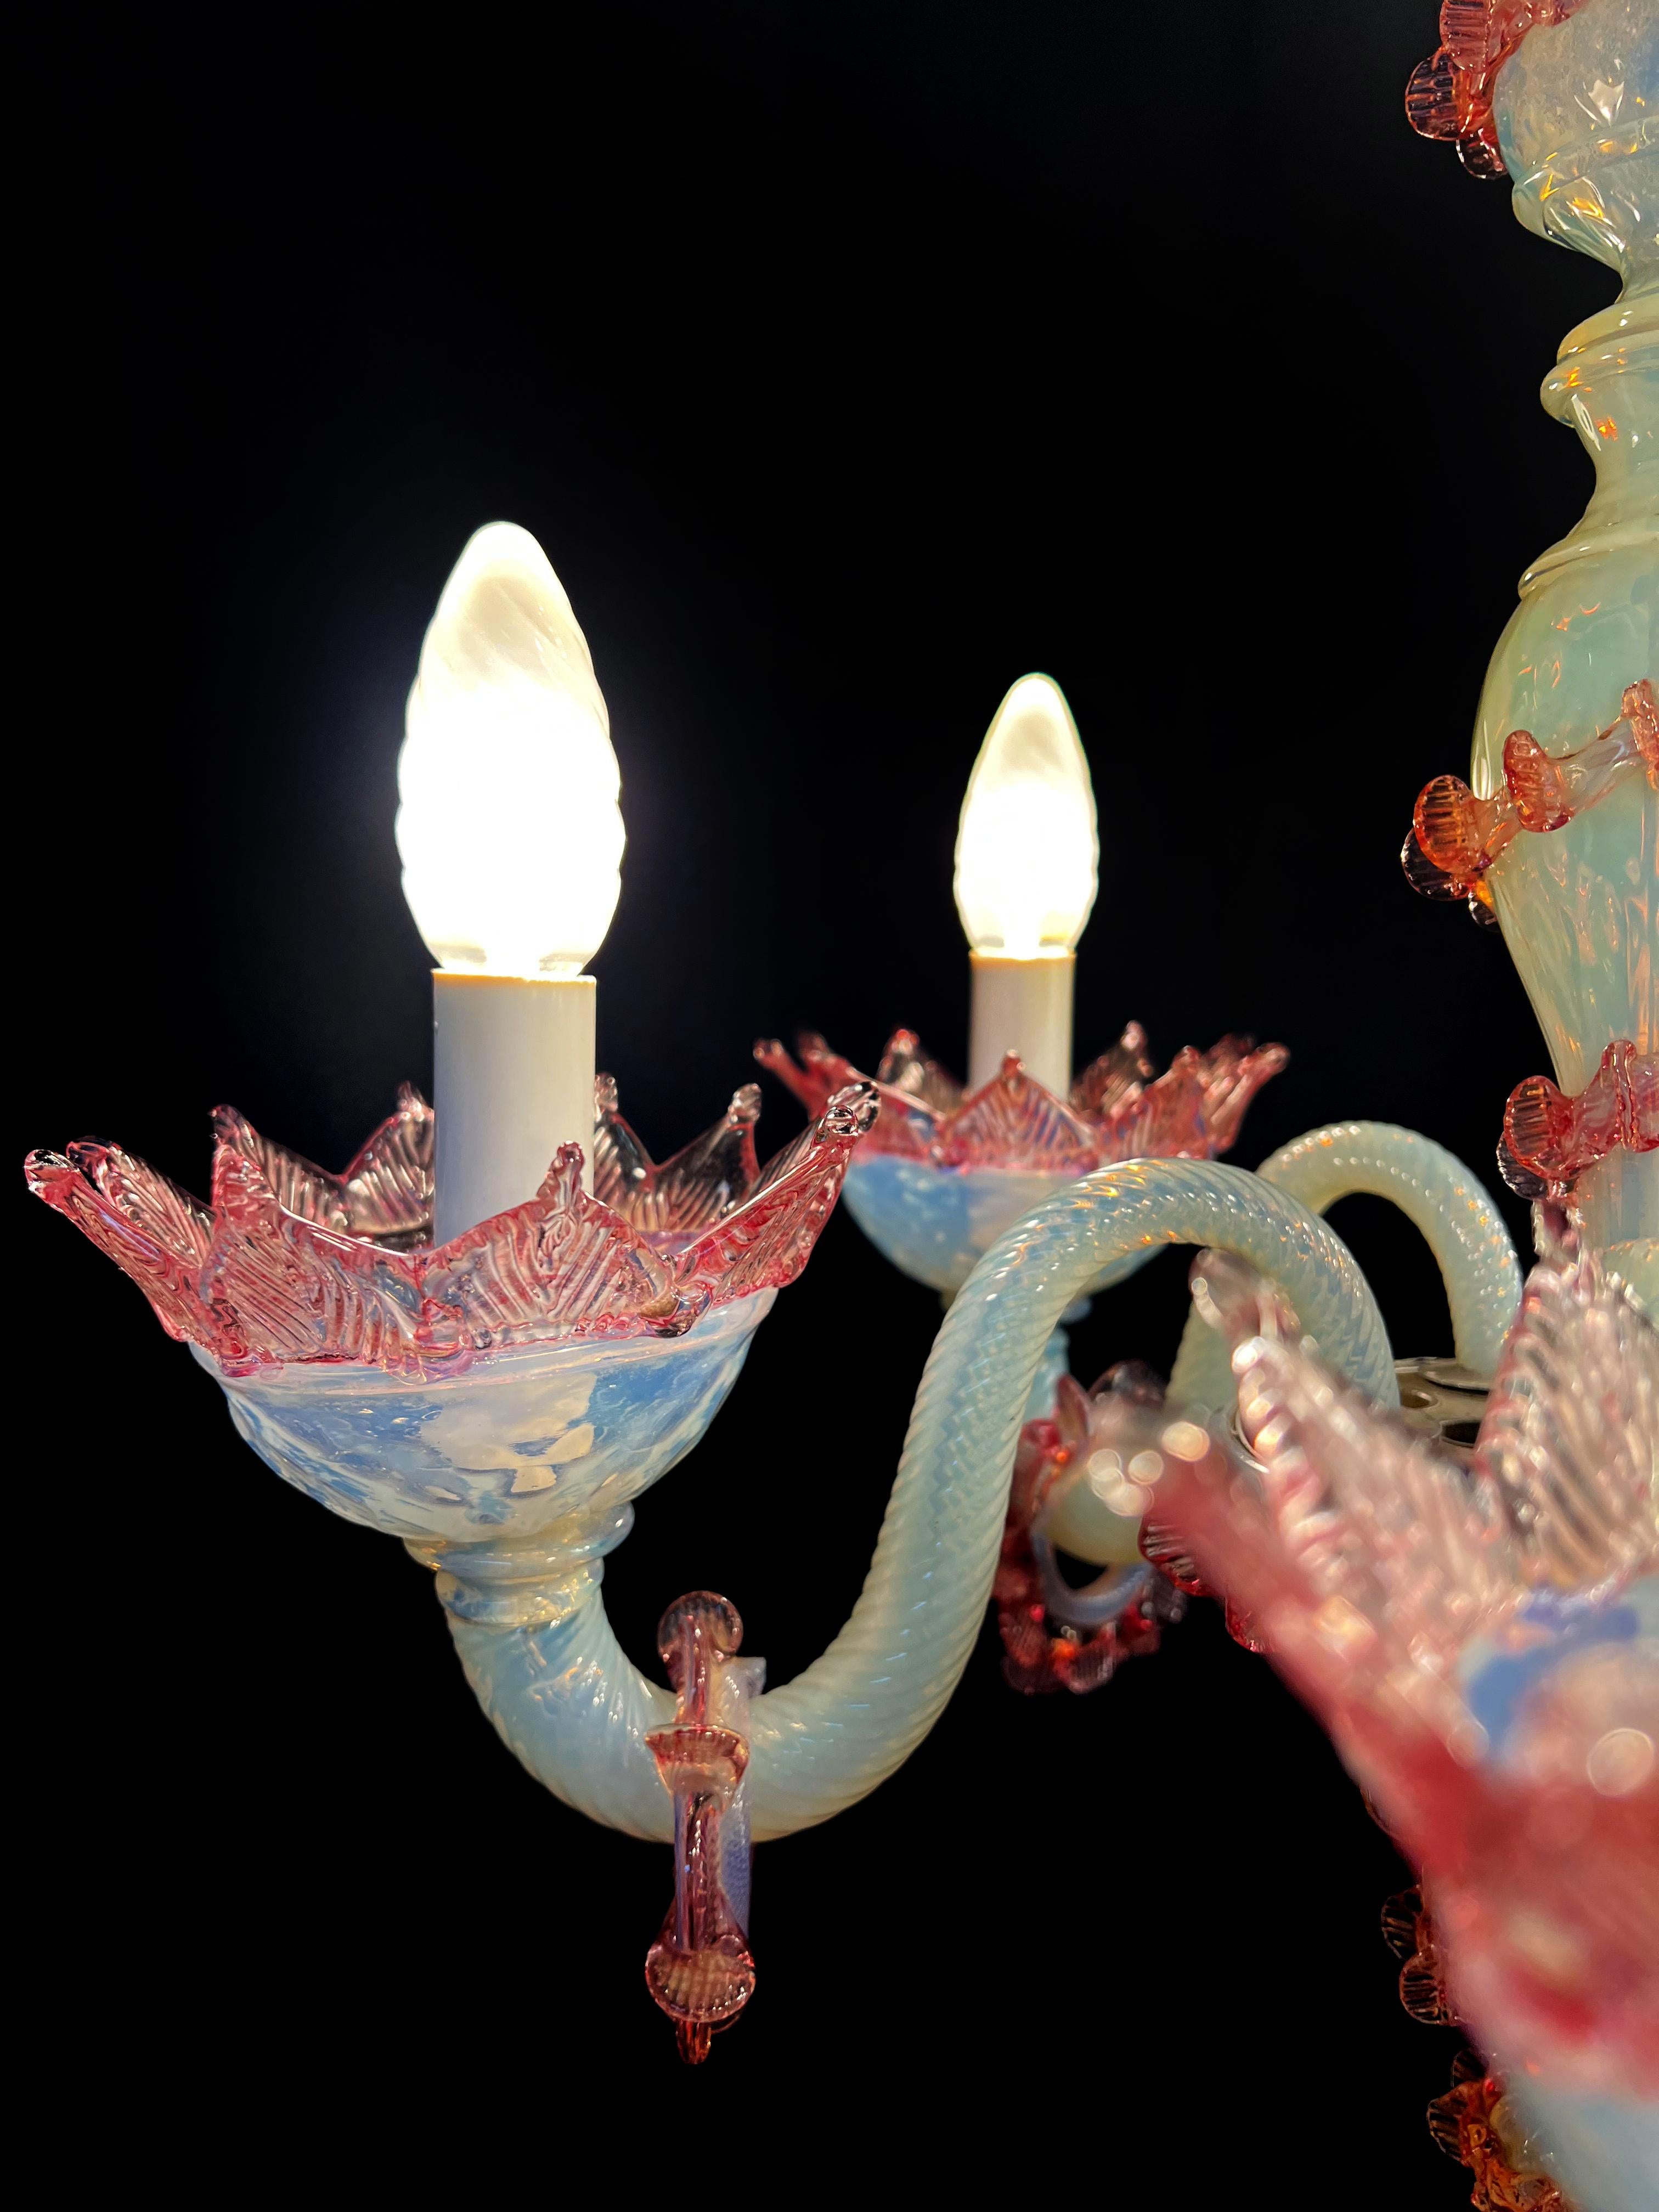 Murano Glass Charming Light Blue and Pink Venetian Chandelier, Murano, 1950s For Sale